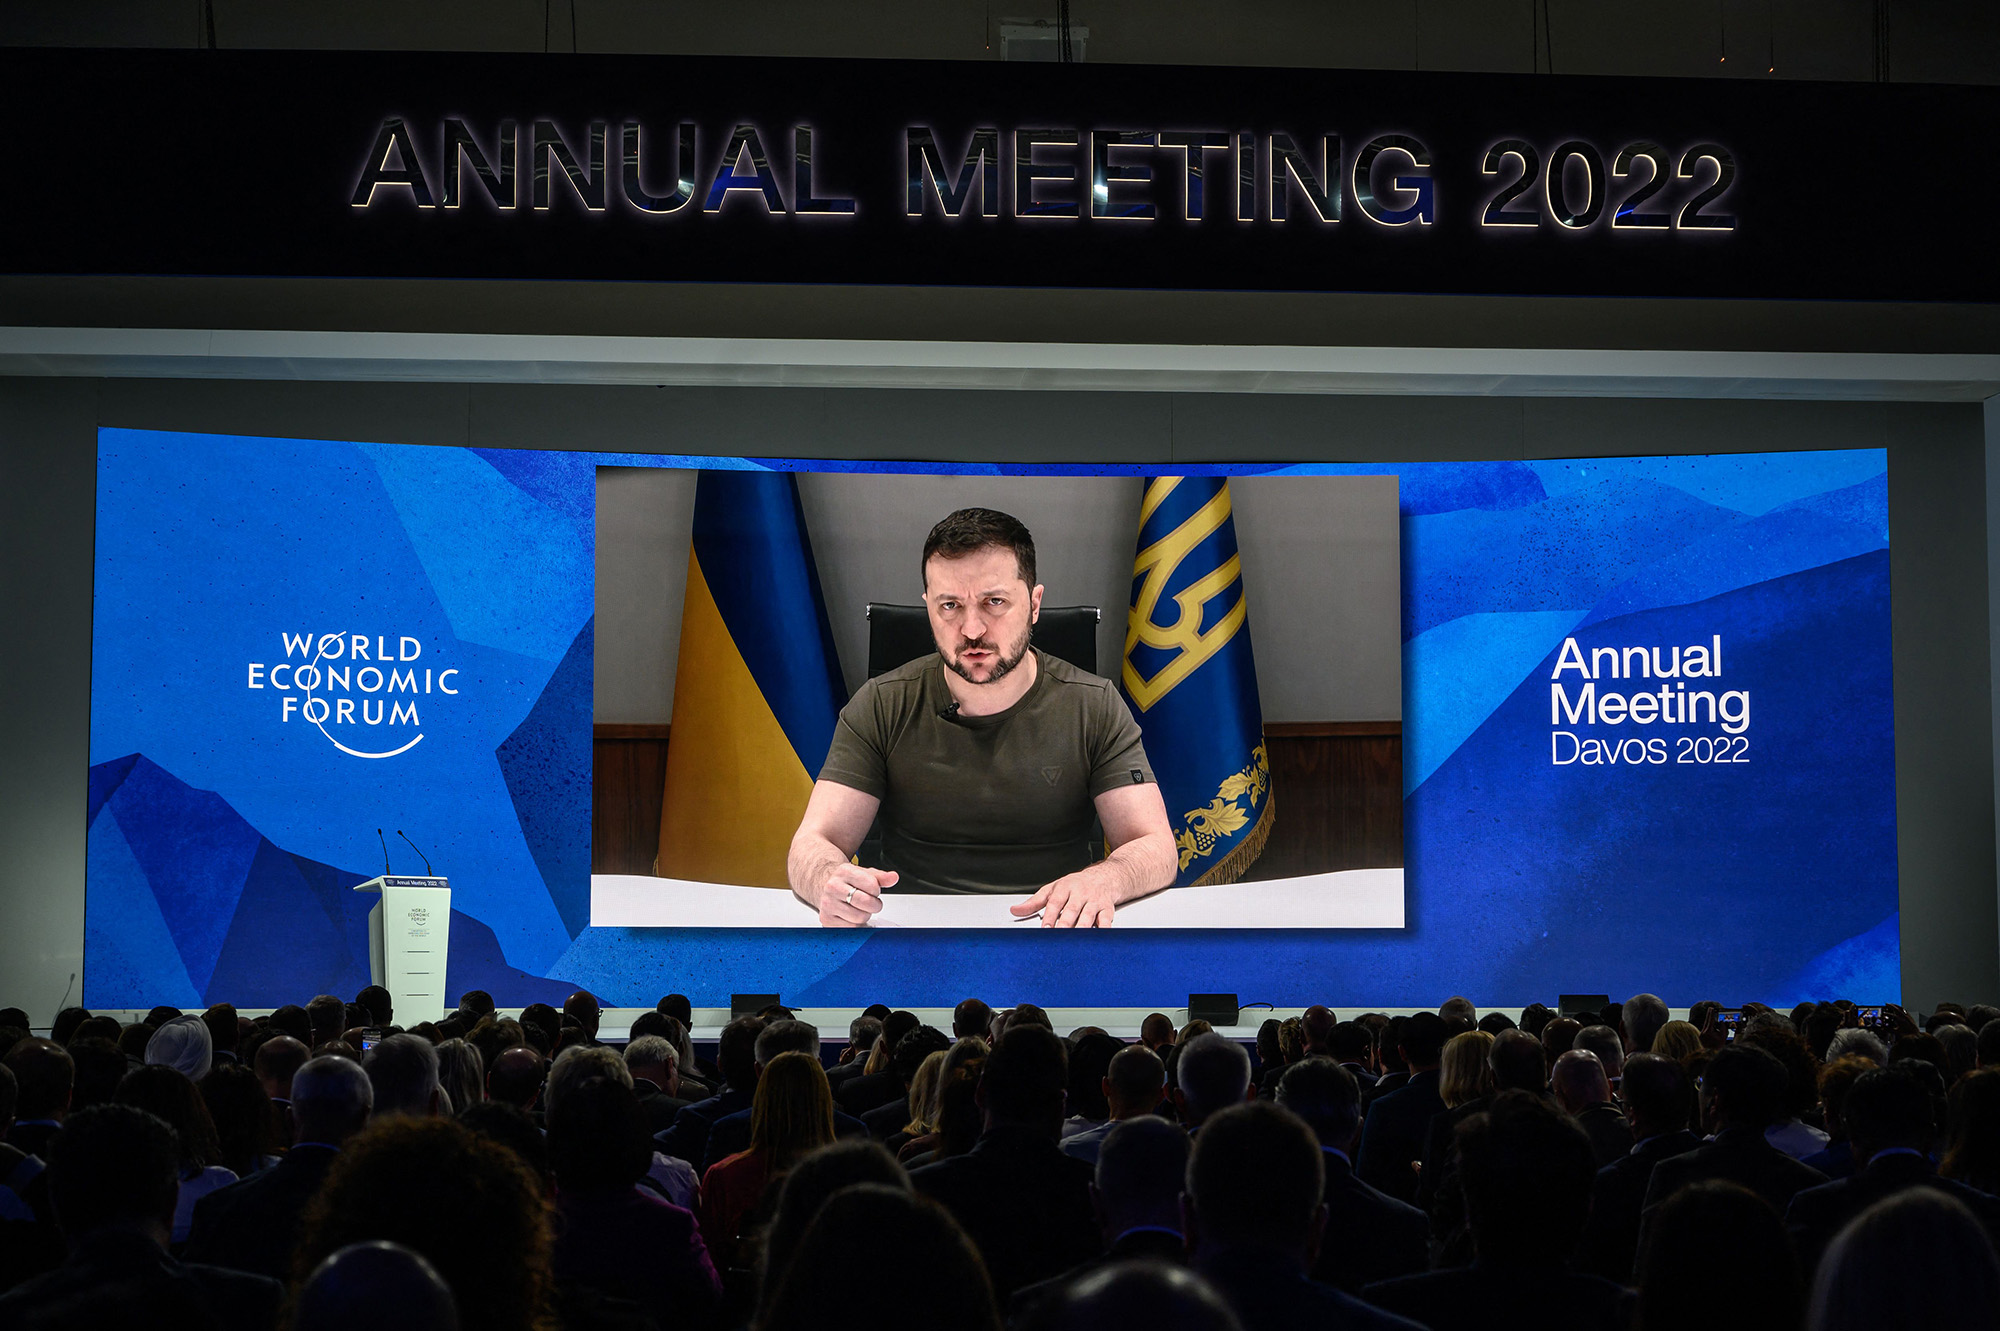 Ukrainian President Volodymyr Zelensky seen on a giant screen by video link delivering remarks at the Congress centre during the World Economic Forum (WEF) annual meeting in Davos, Switzerland, on May 23.